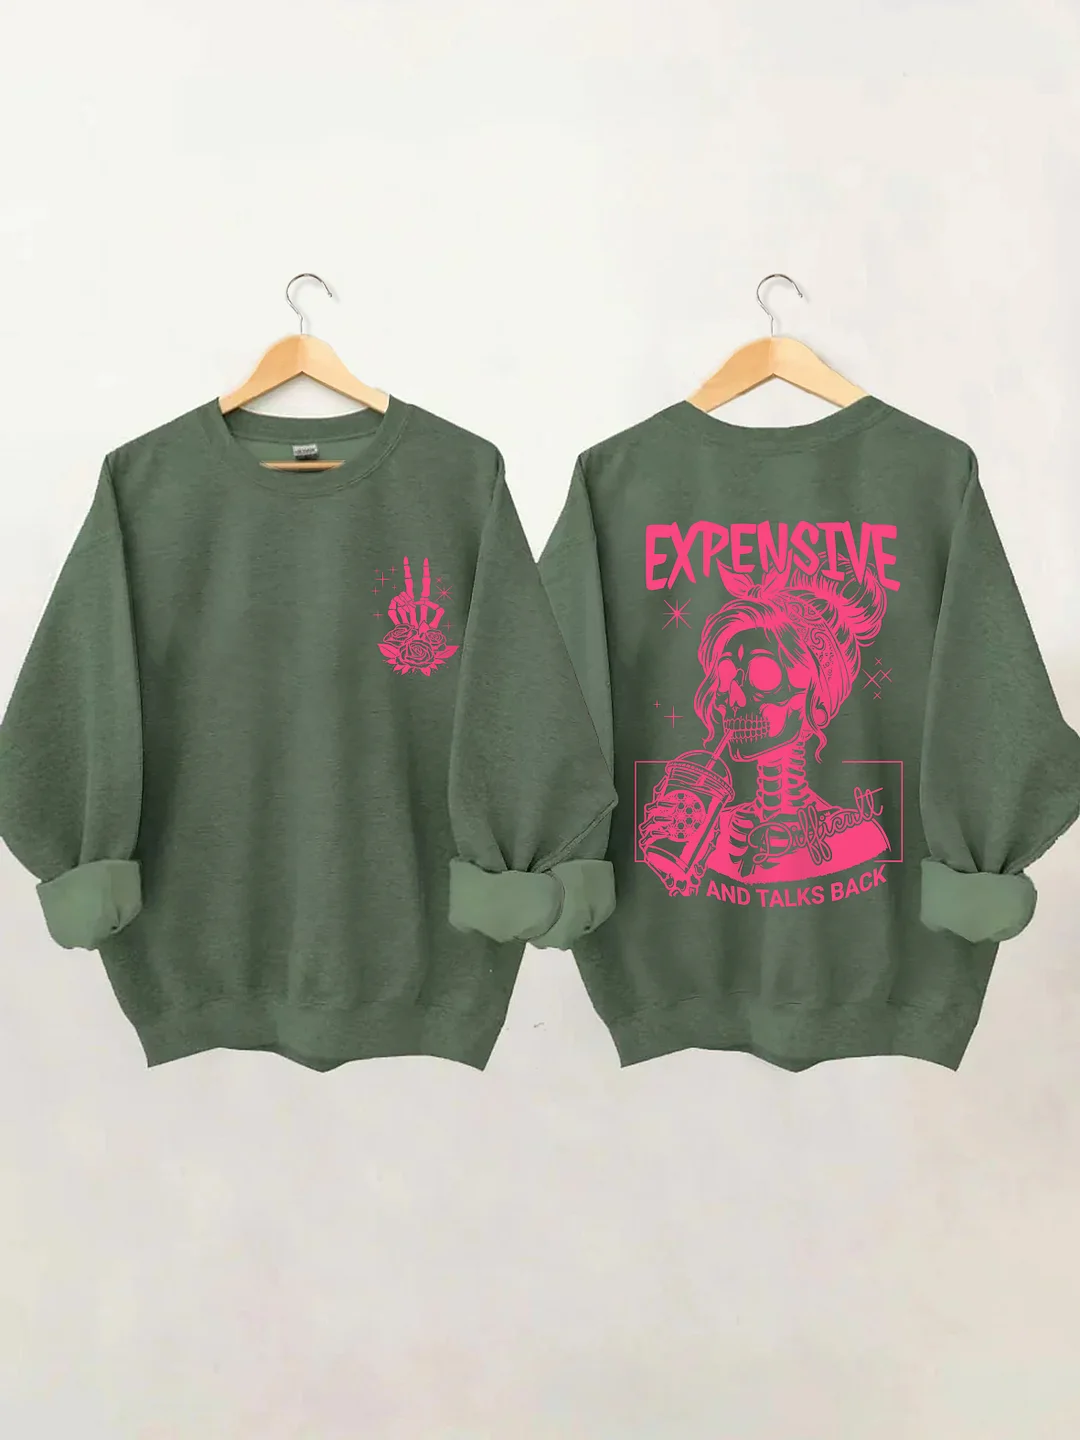 Expensive Difficult And Talks Back Sweatshirt 